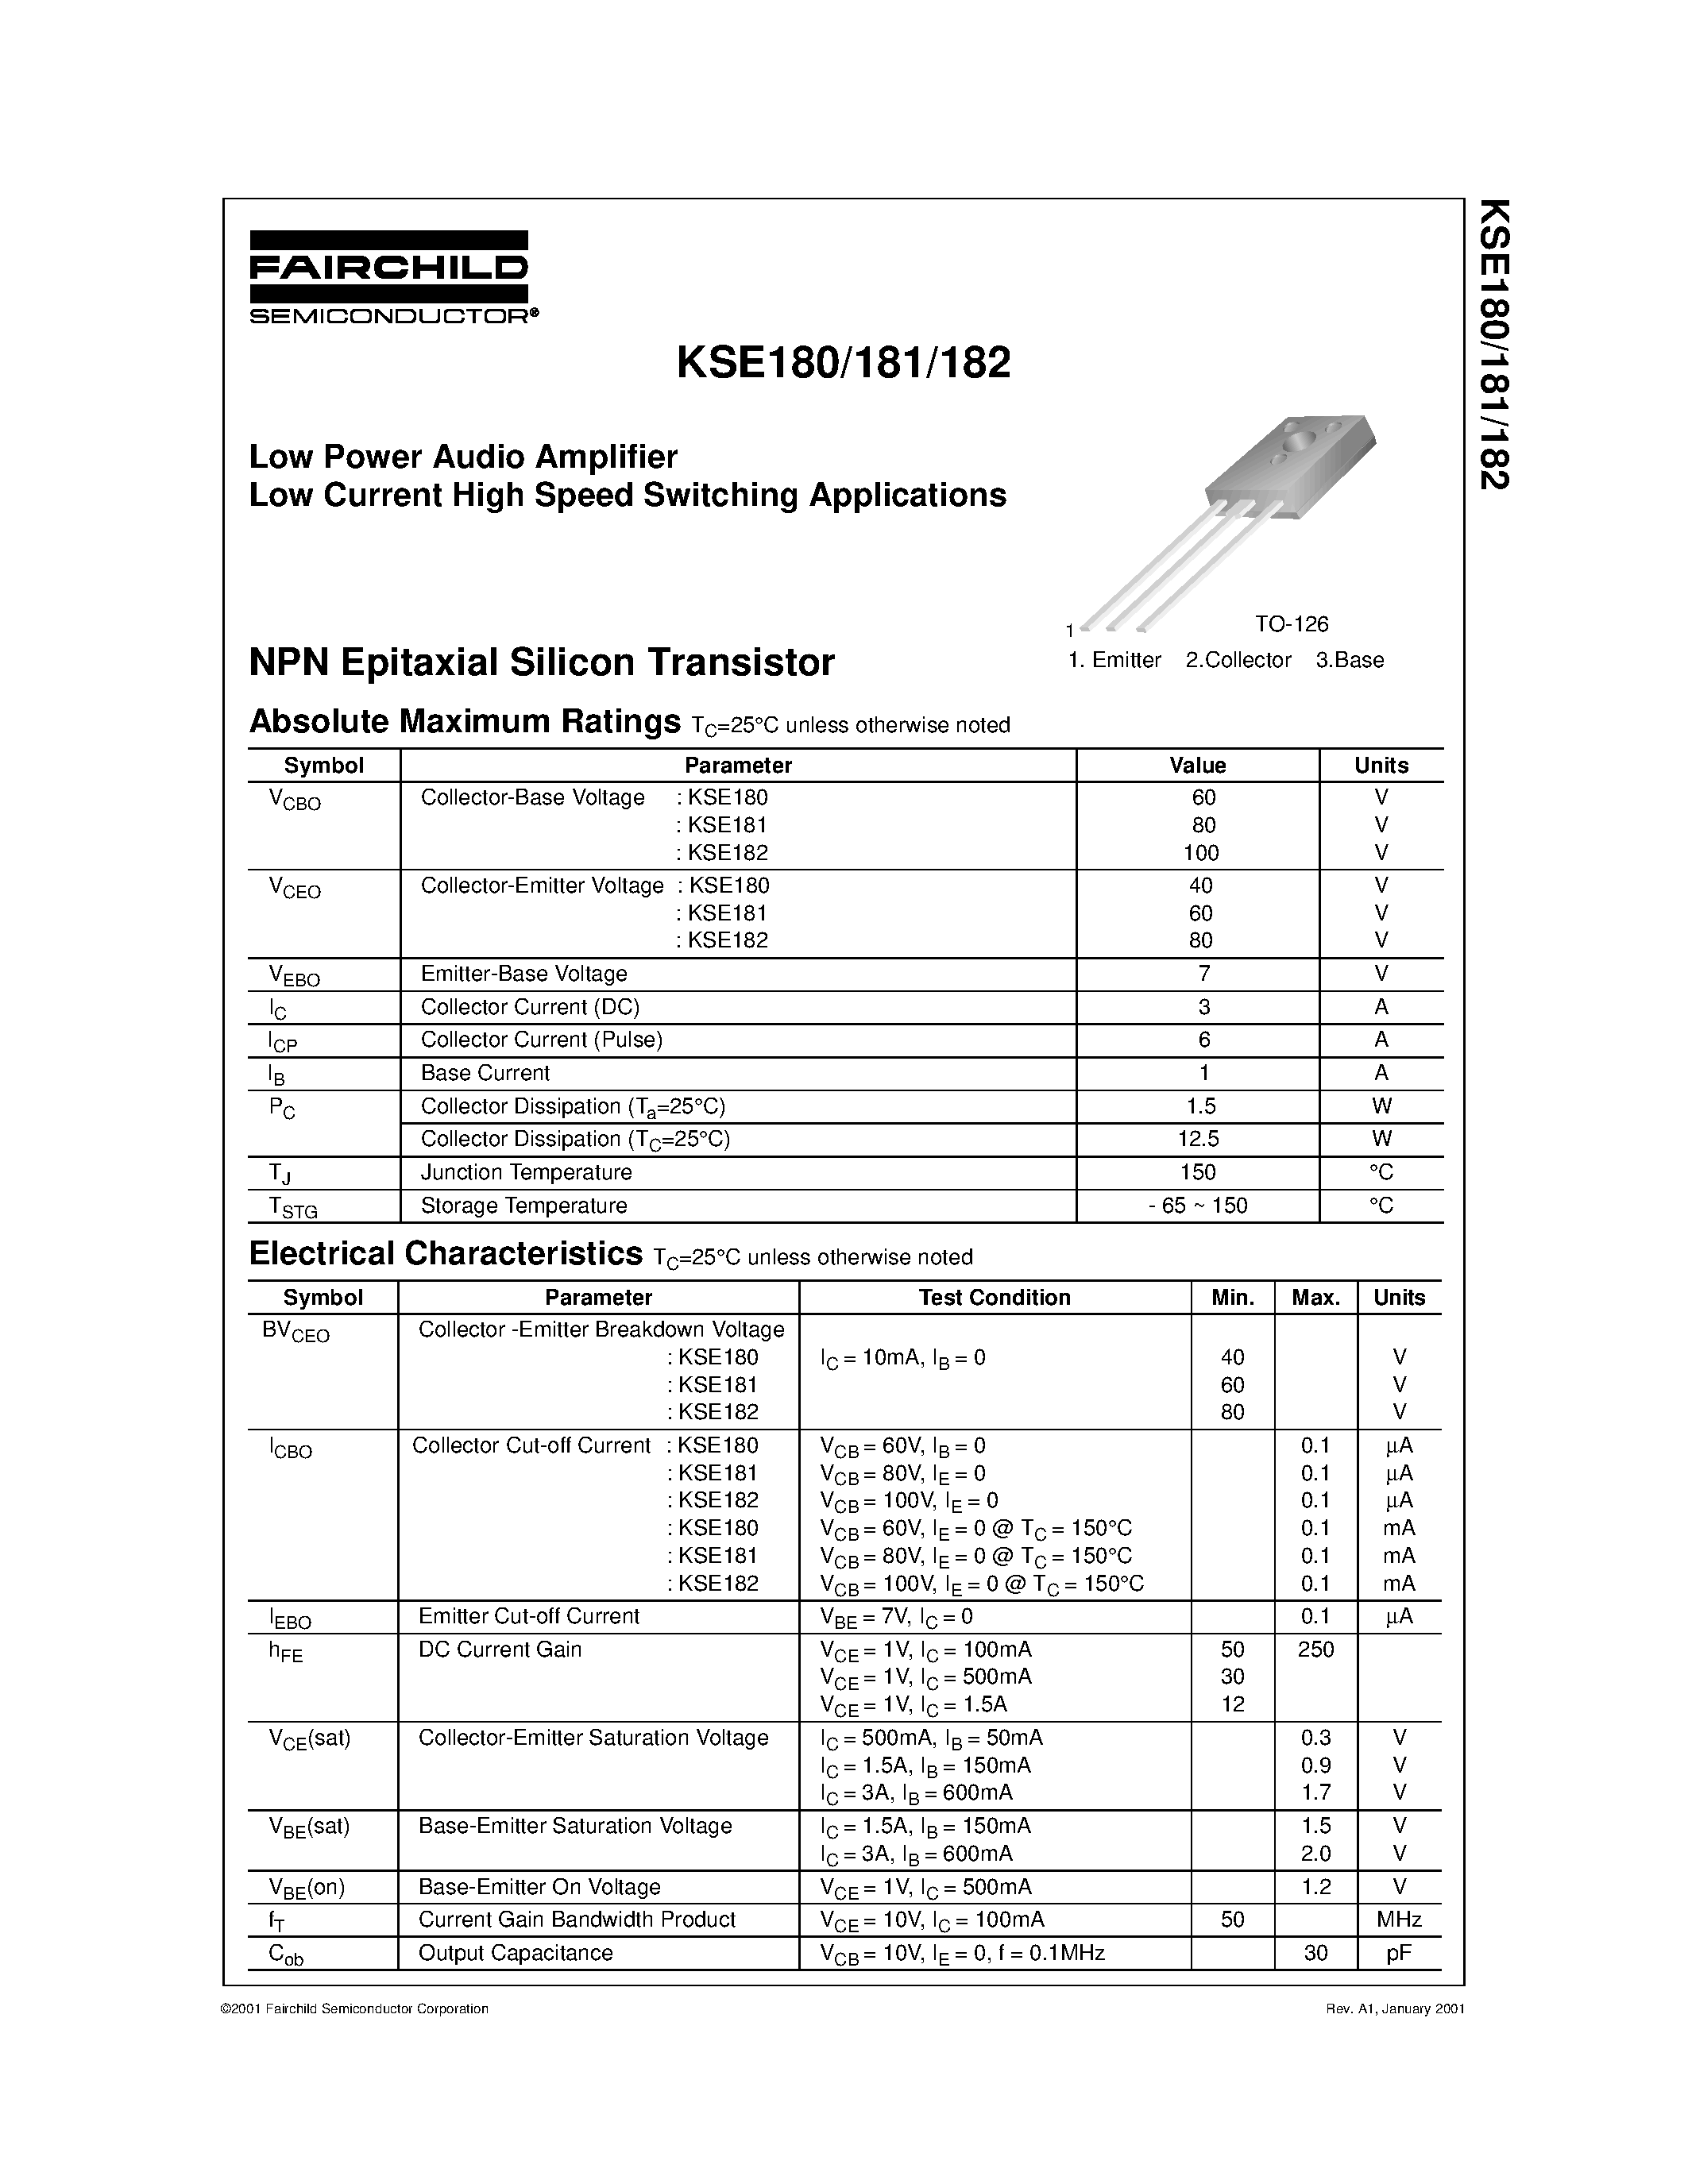 Datasheet KSE181 - Low Power Audio Amplifier Low Current High Speed Switching Applications page 1